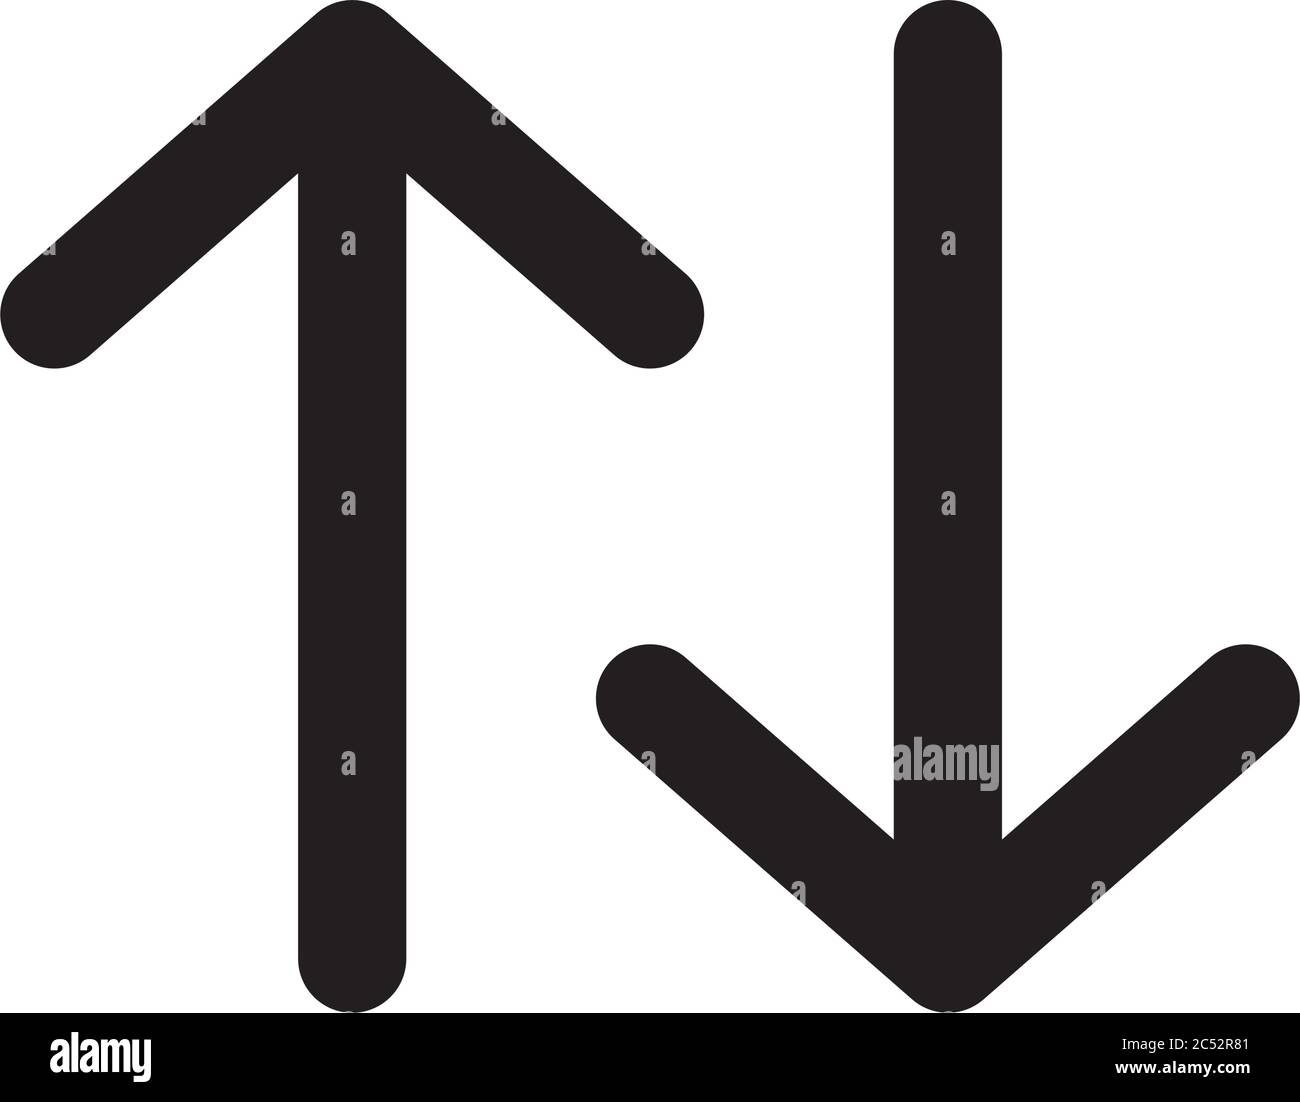 Up And Down Arrows Icon Over White Background Silhouette Style Vector Illustration Stock Vector Image Art Alamy